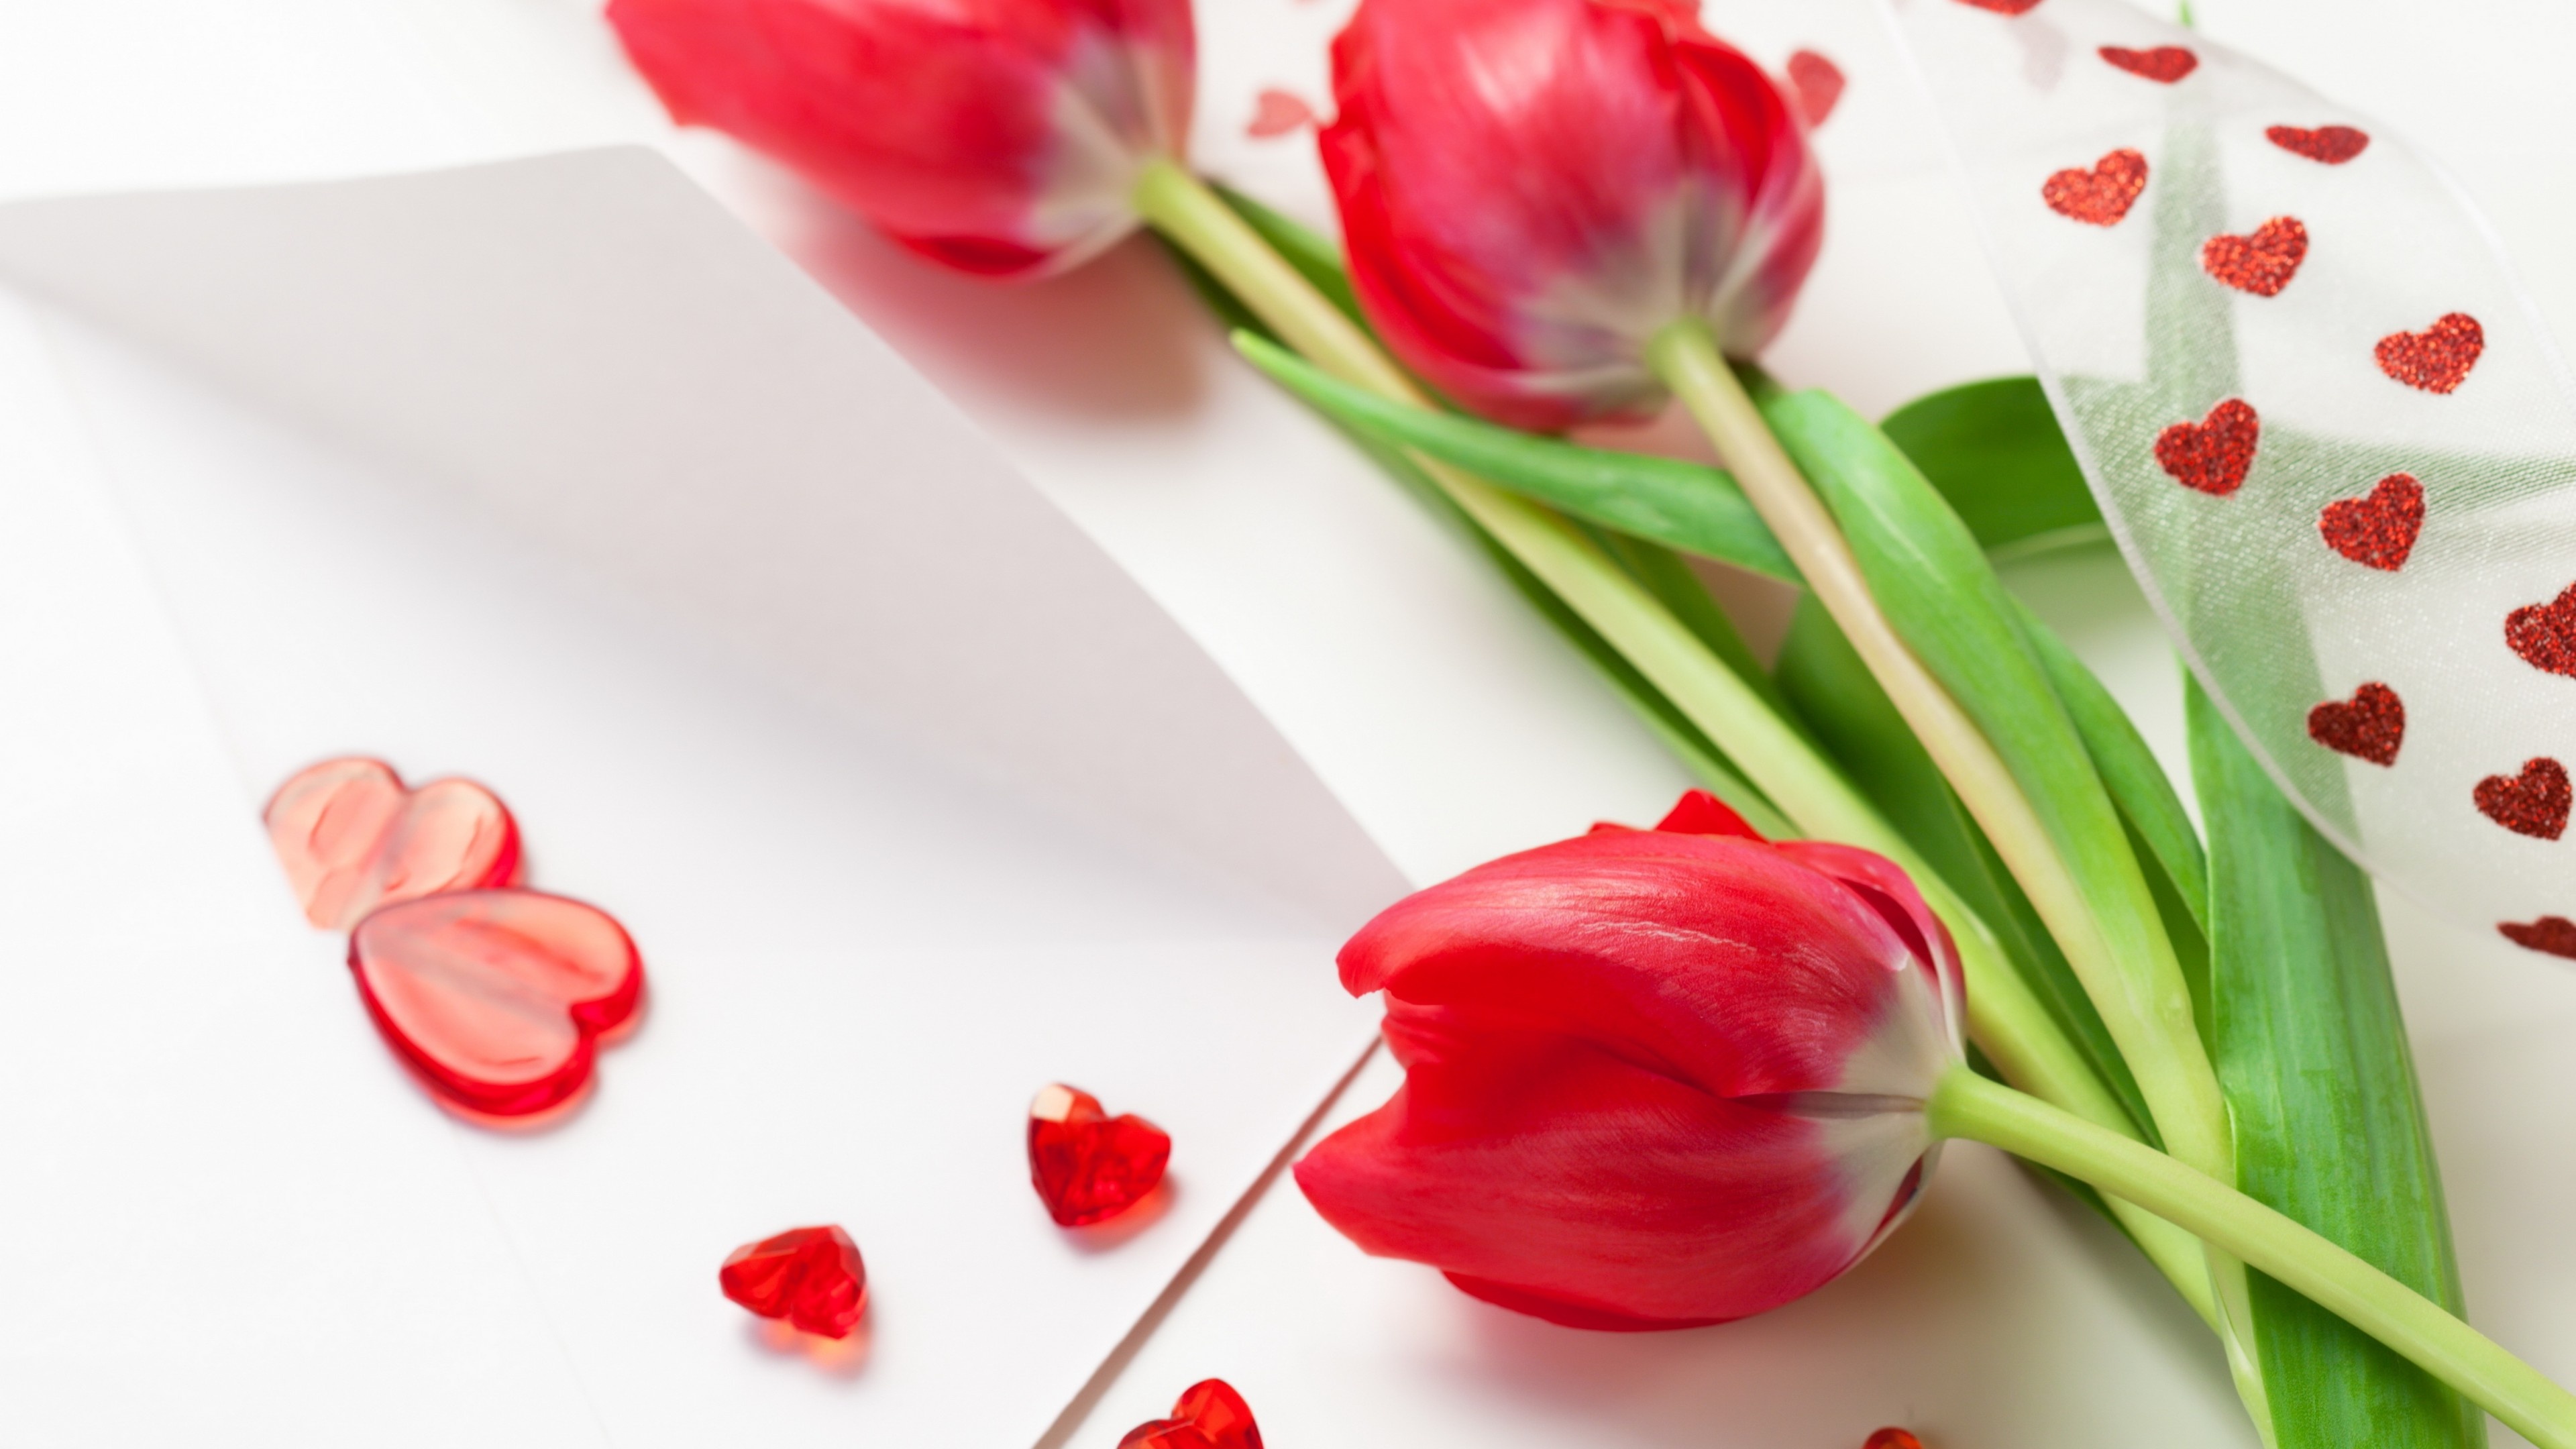 Hearts and Flowers, Red tulip, Love and nature, Spring beauty, 3840x2160 4K Desktop